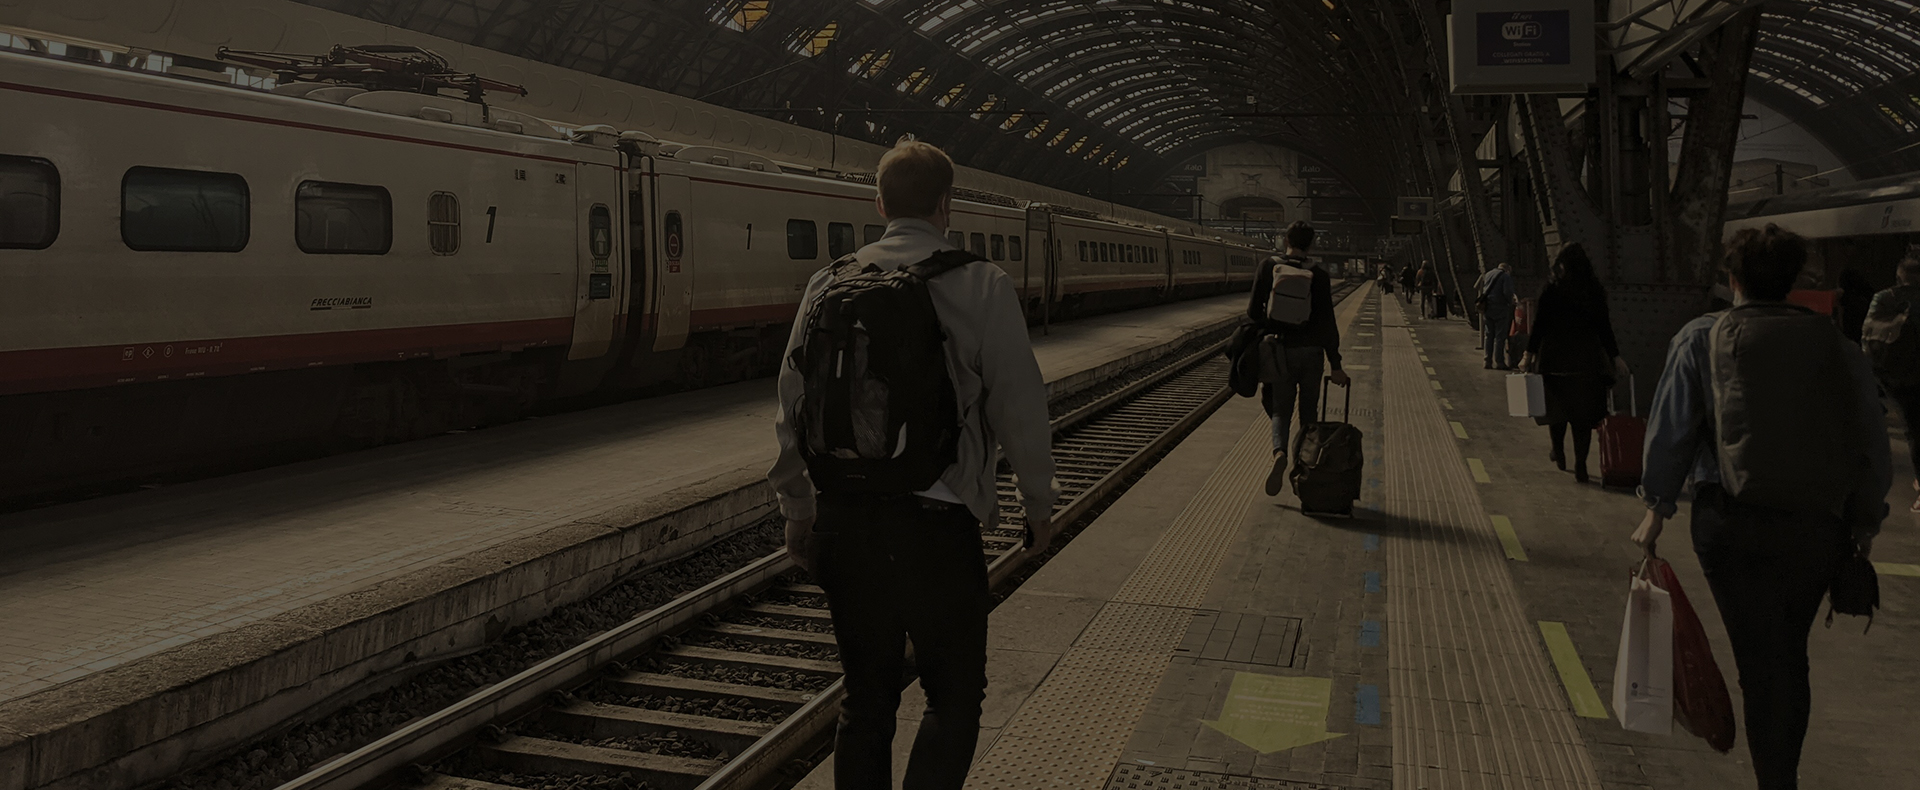 Passengers walking along a train platform with luggage, with a train waiting on the next platform.